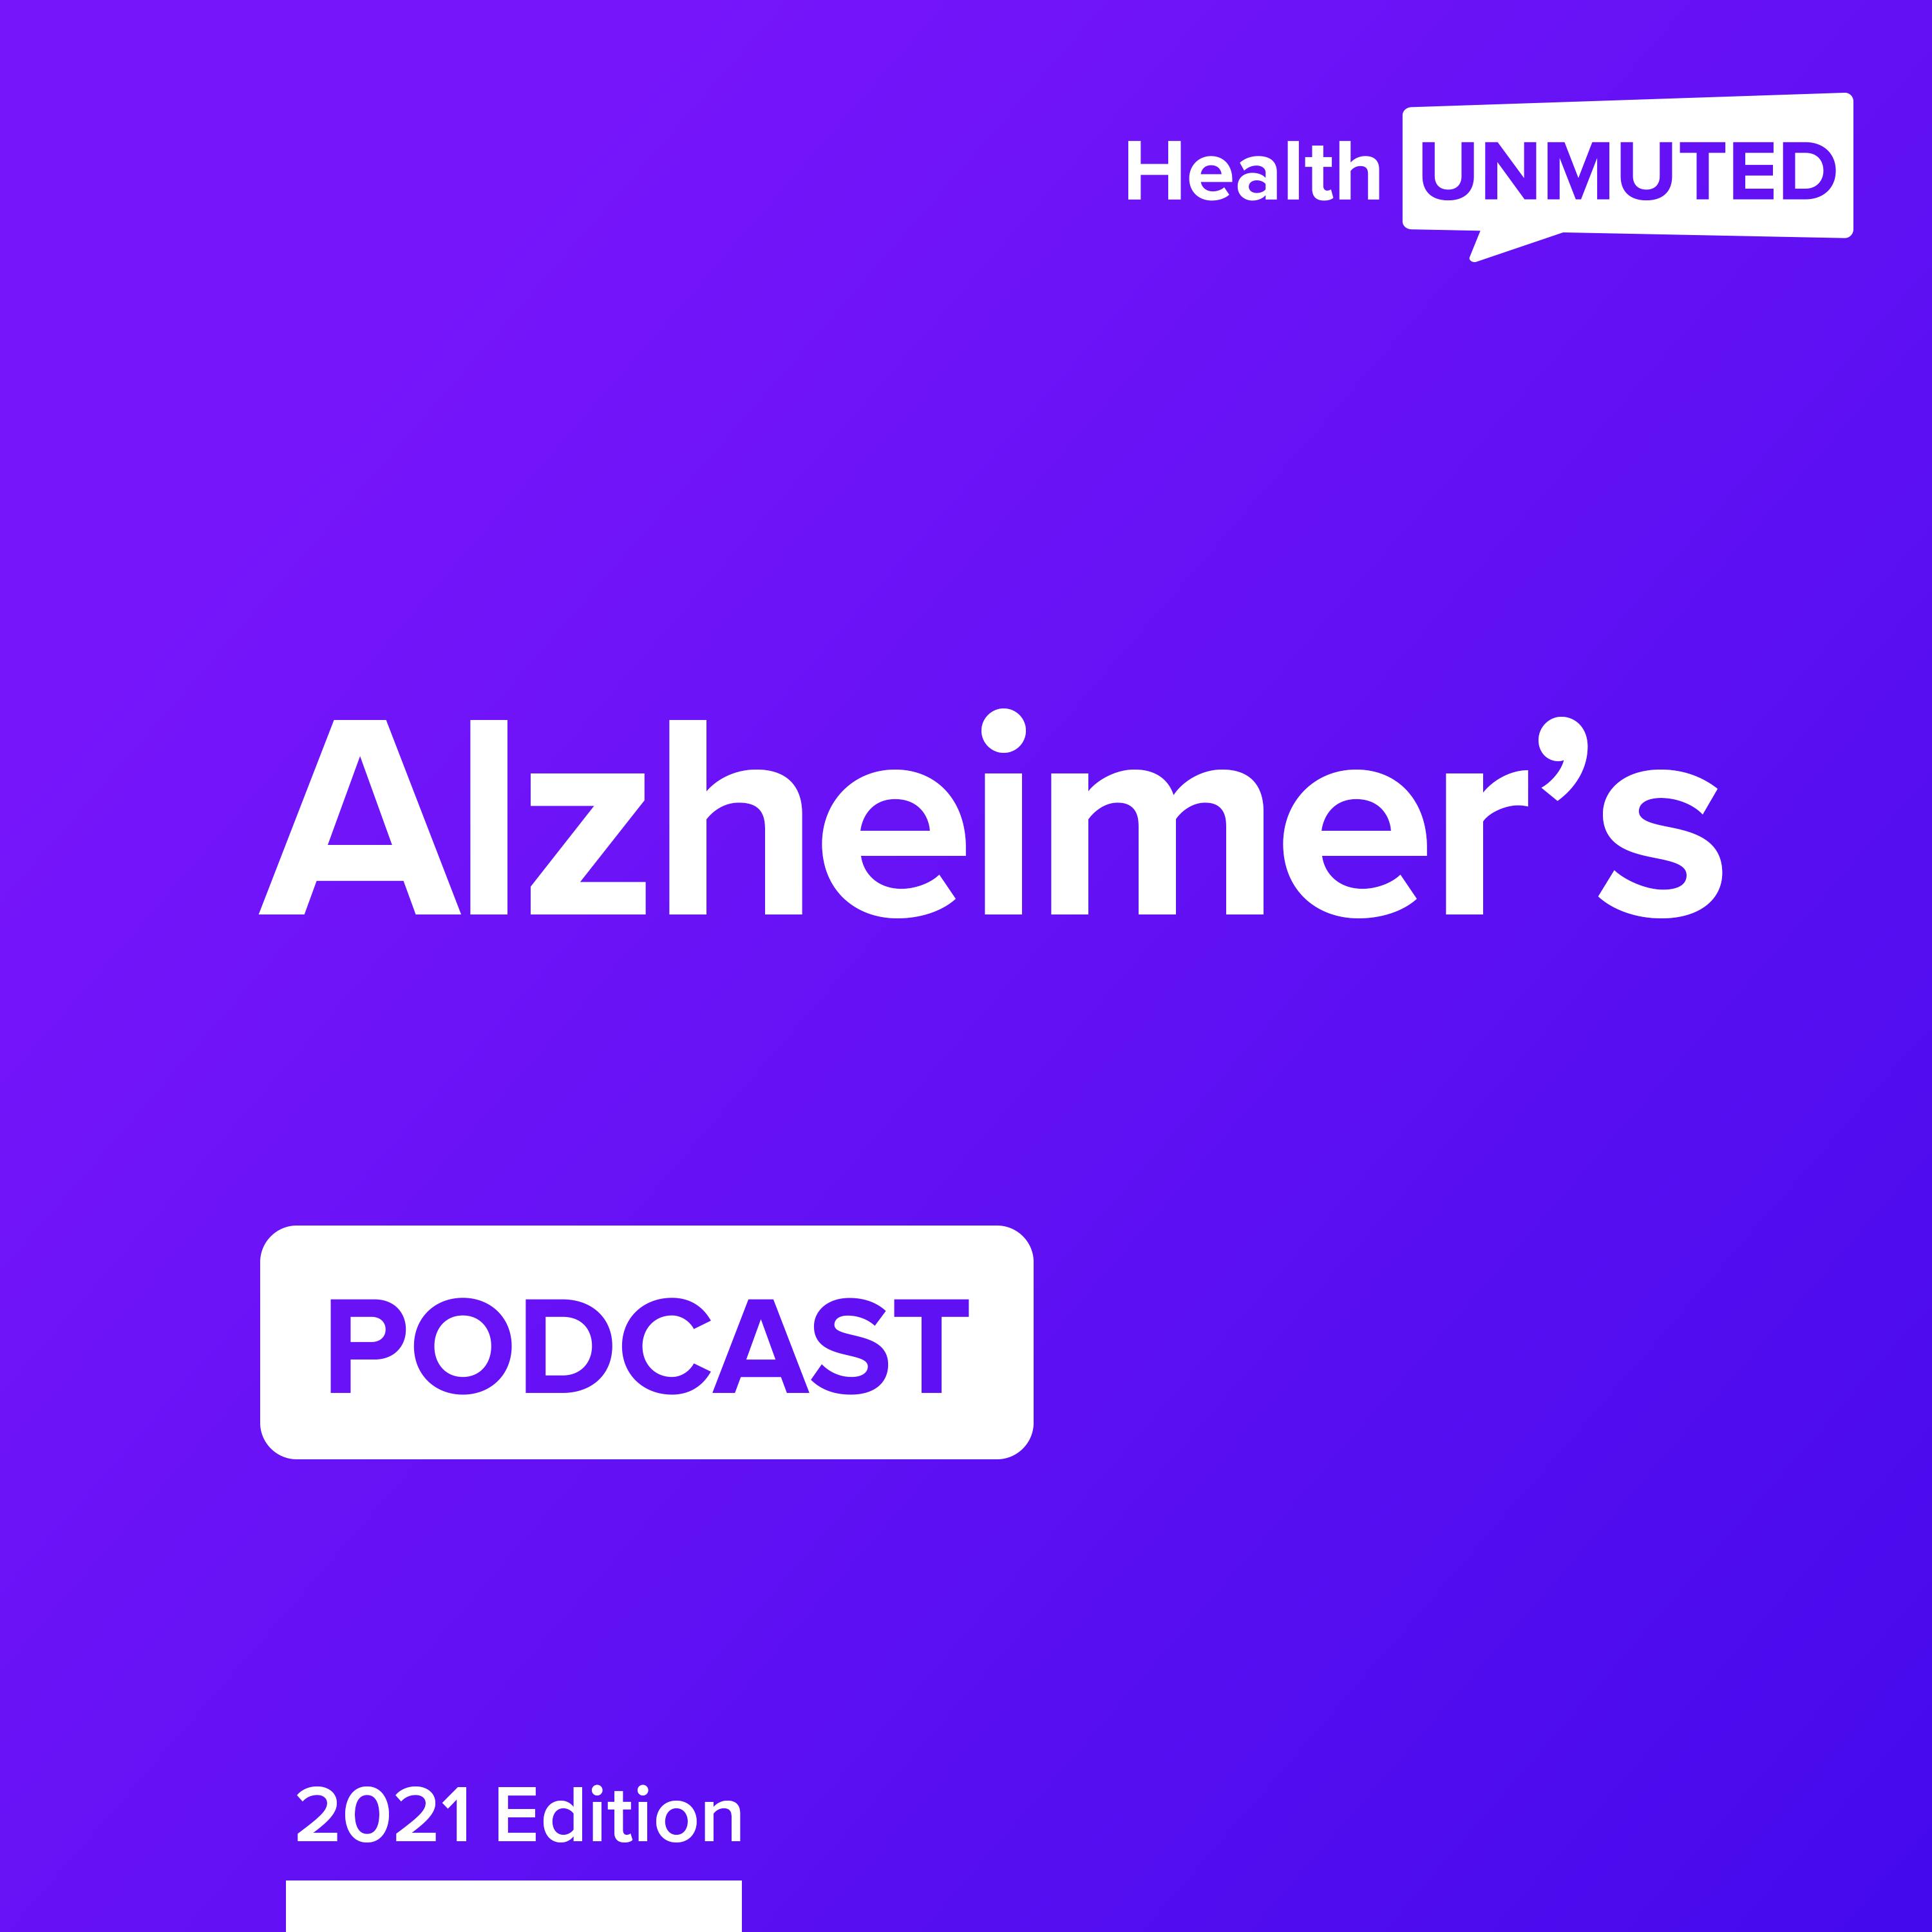 Welcome to the Alzheimer's Podcast